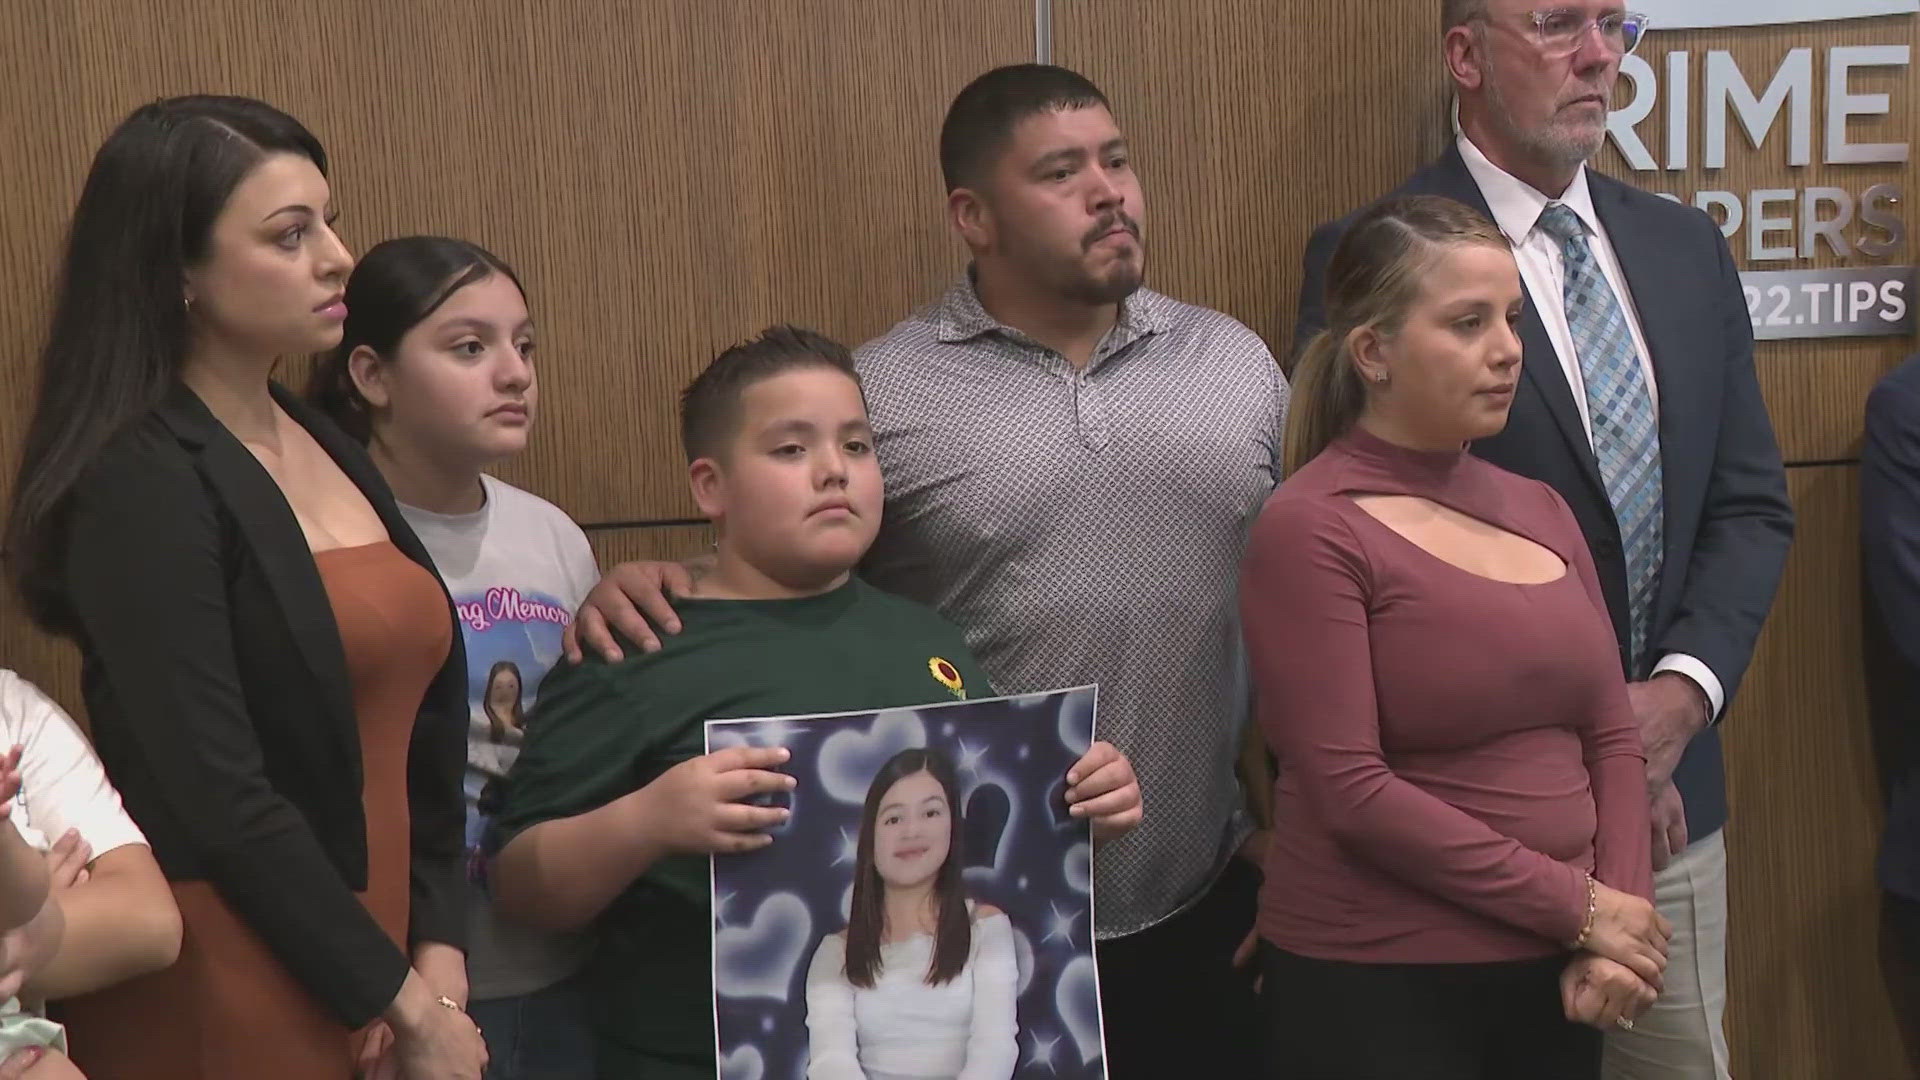 “What he did that night was execute a little girl. She was shot in the temple and she didn’t deserve that bullet in the head," said April Aguirre, the girl's aunt.